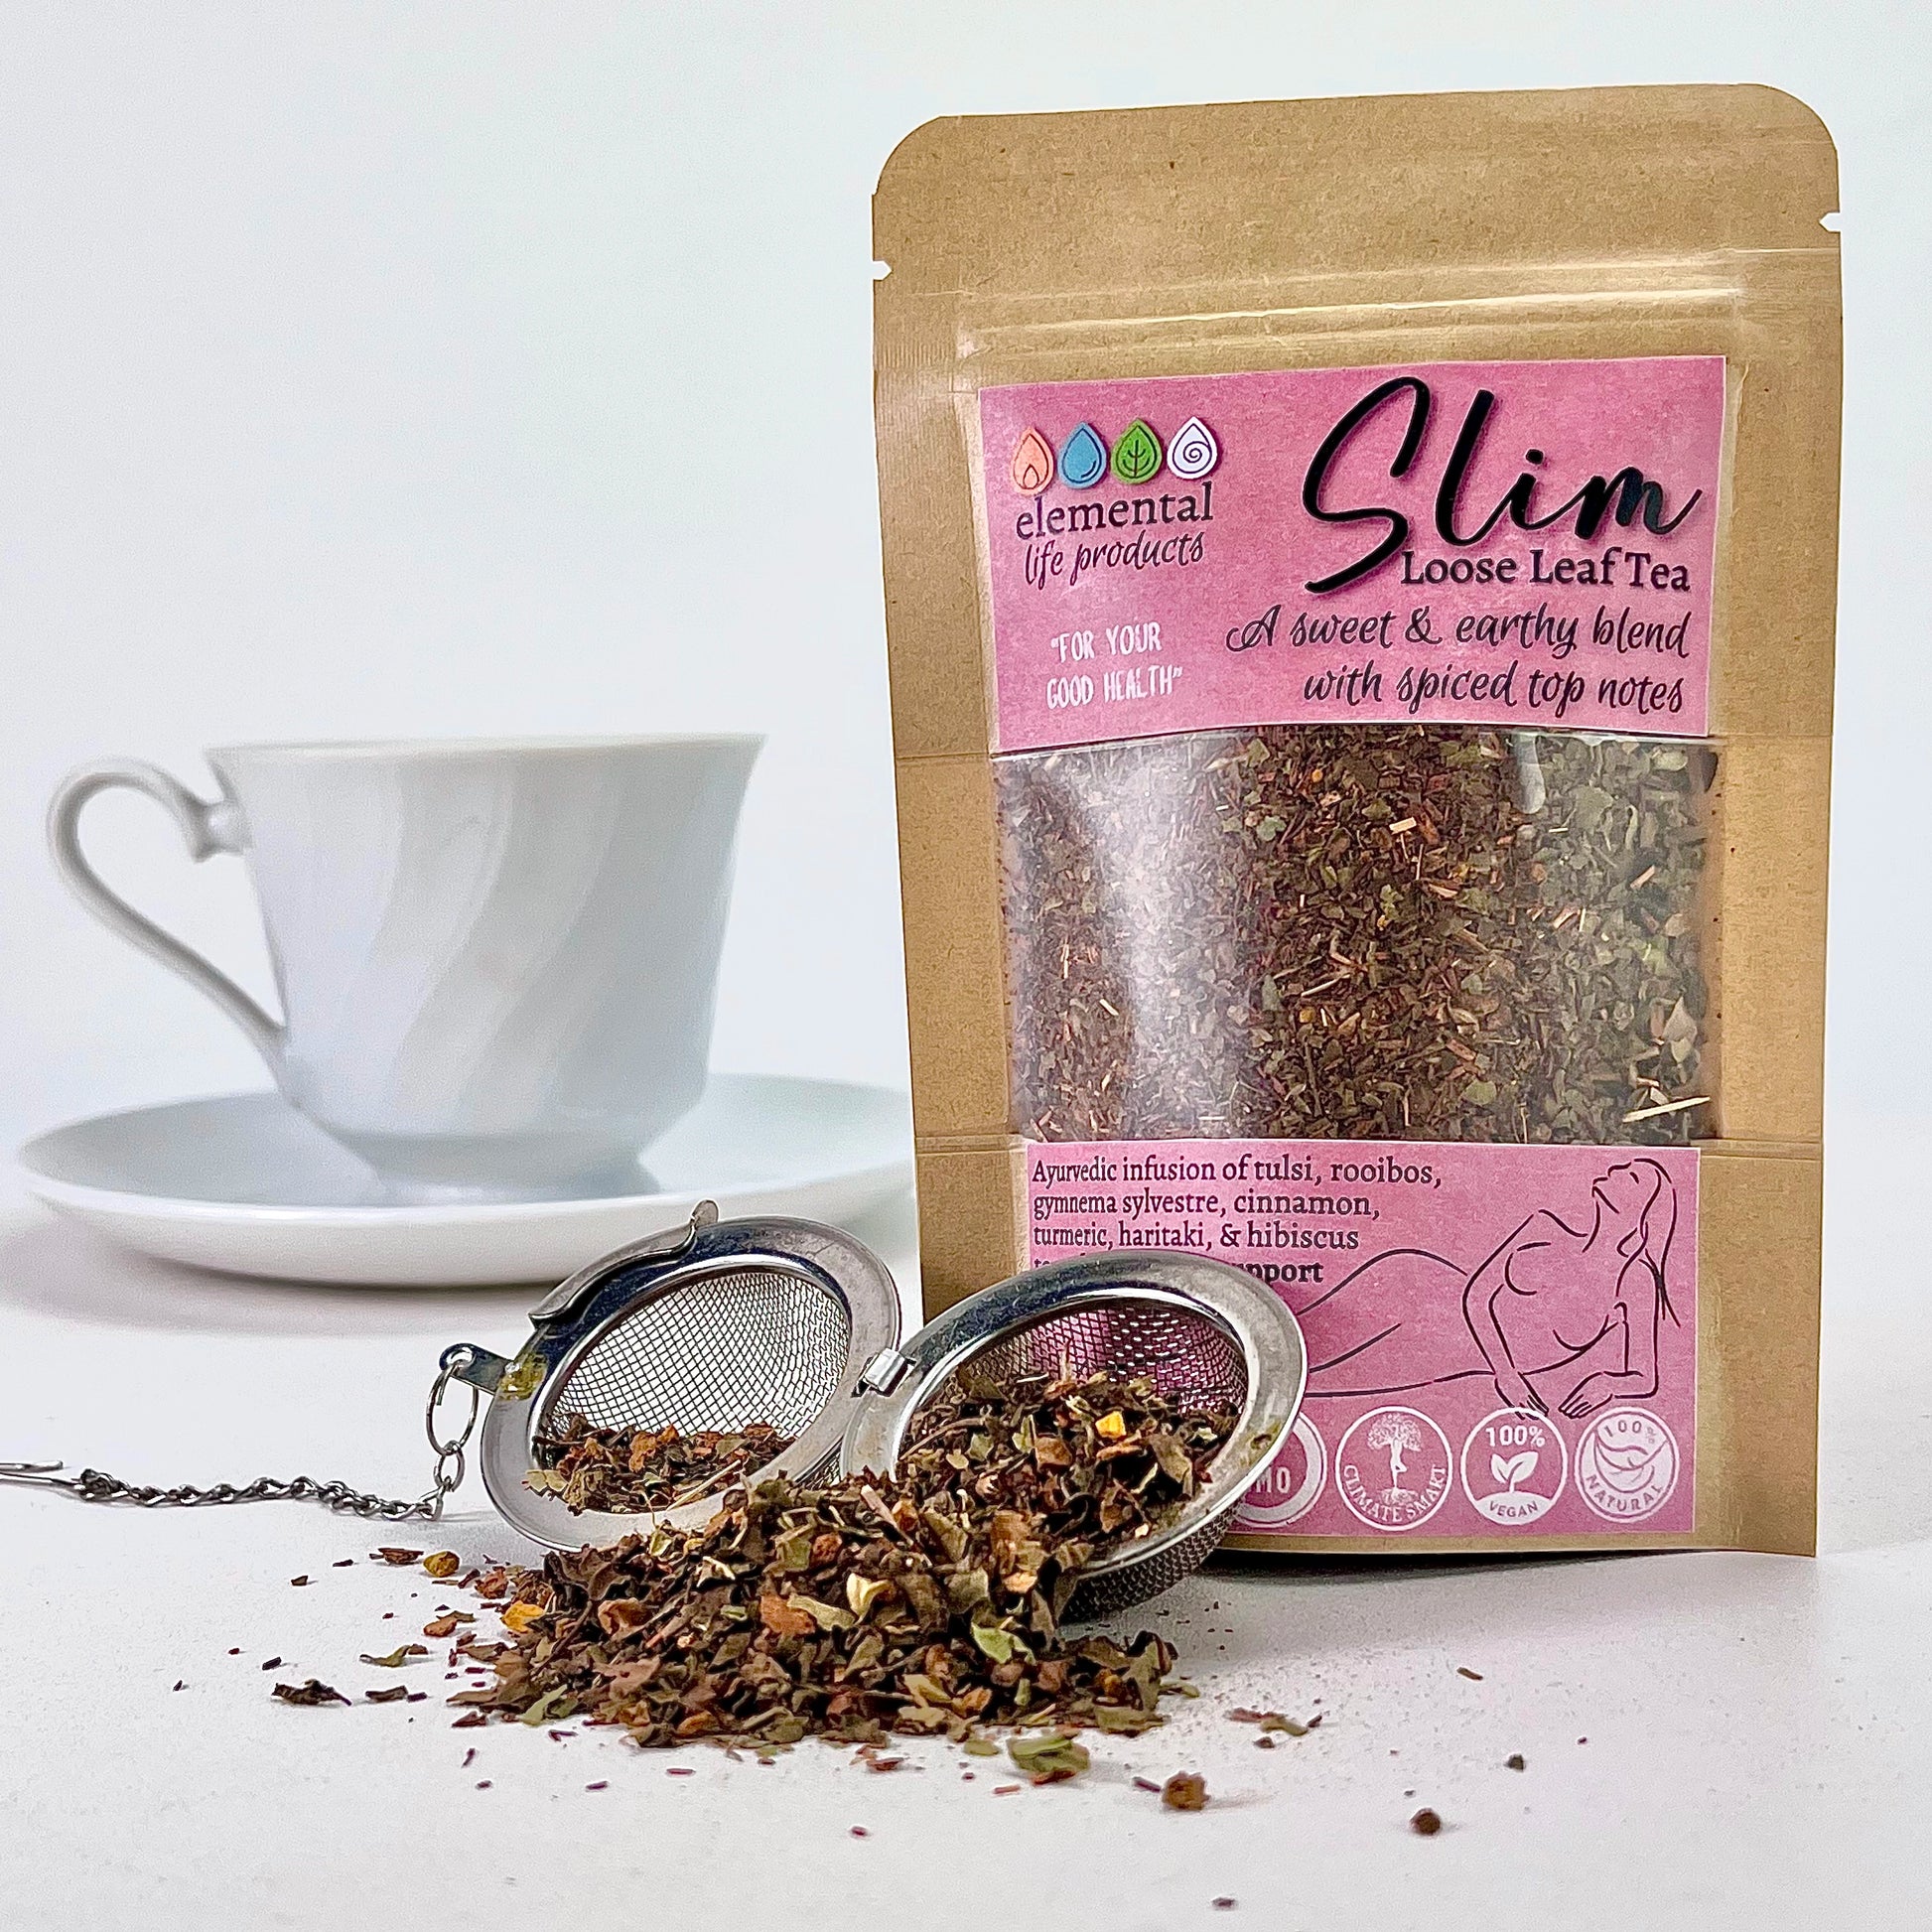 Elemental Life Product's Slim Loose Leaf tea with tulsi, rooibos, and gymnema sylvestre with a tea ball and tea cup.